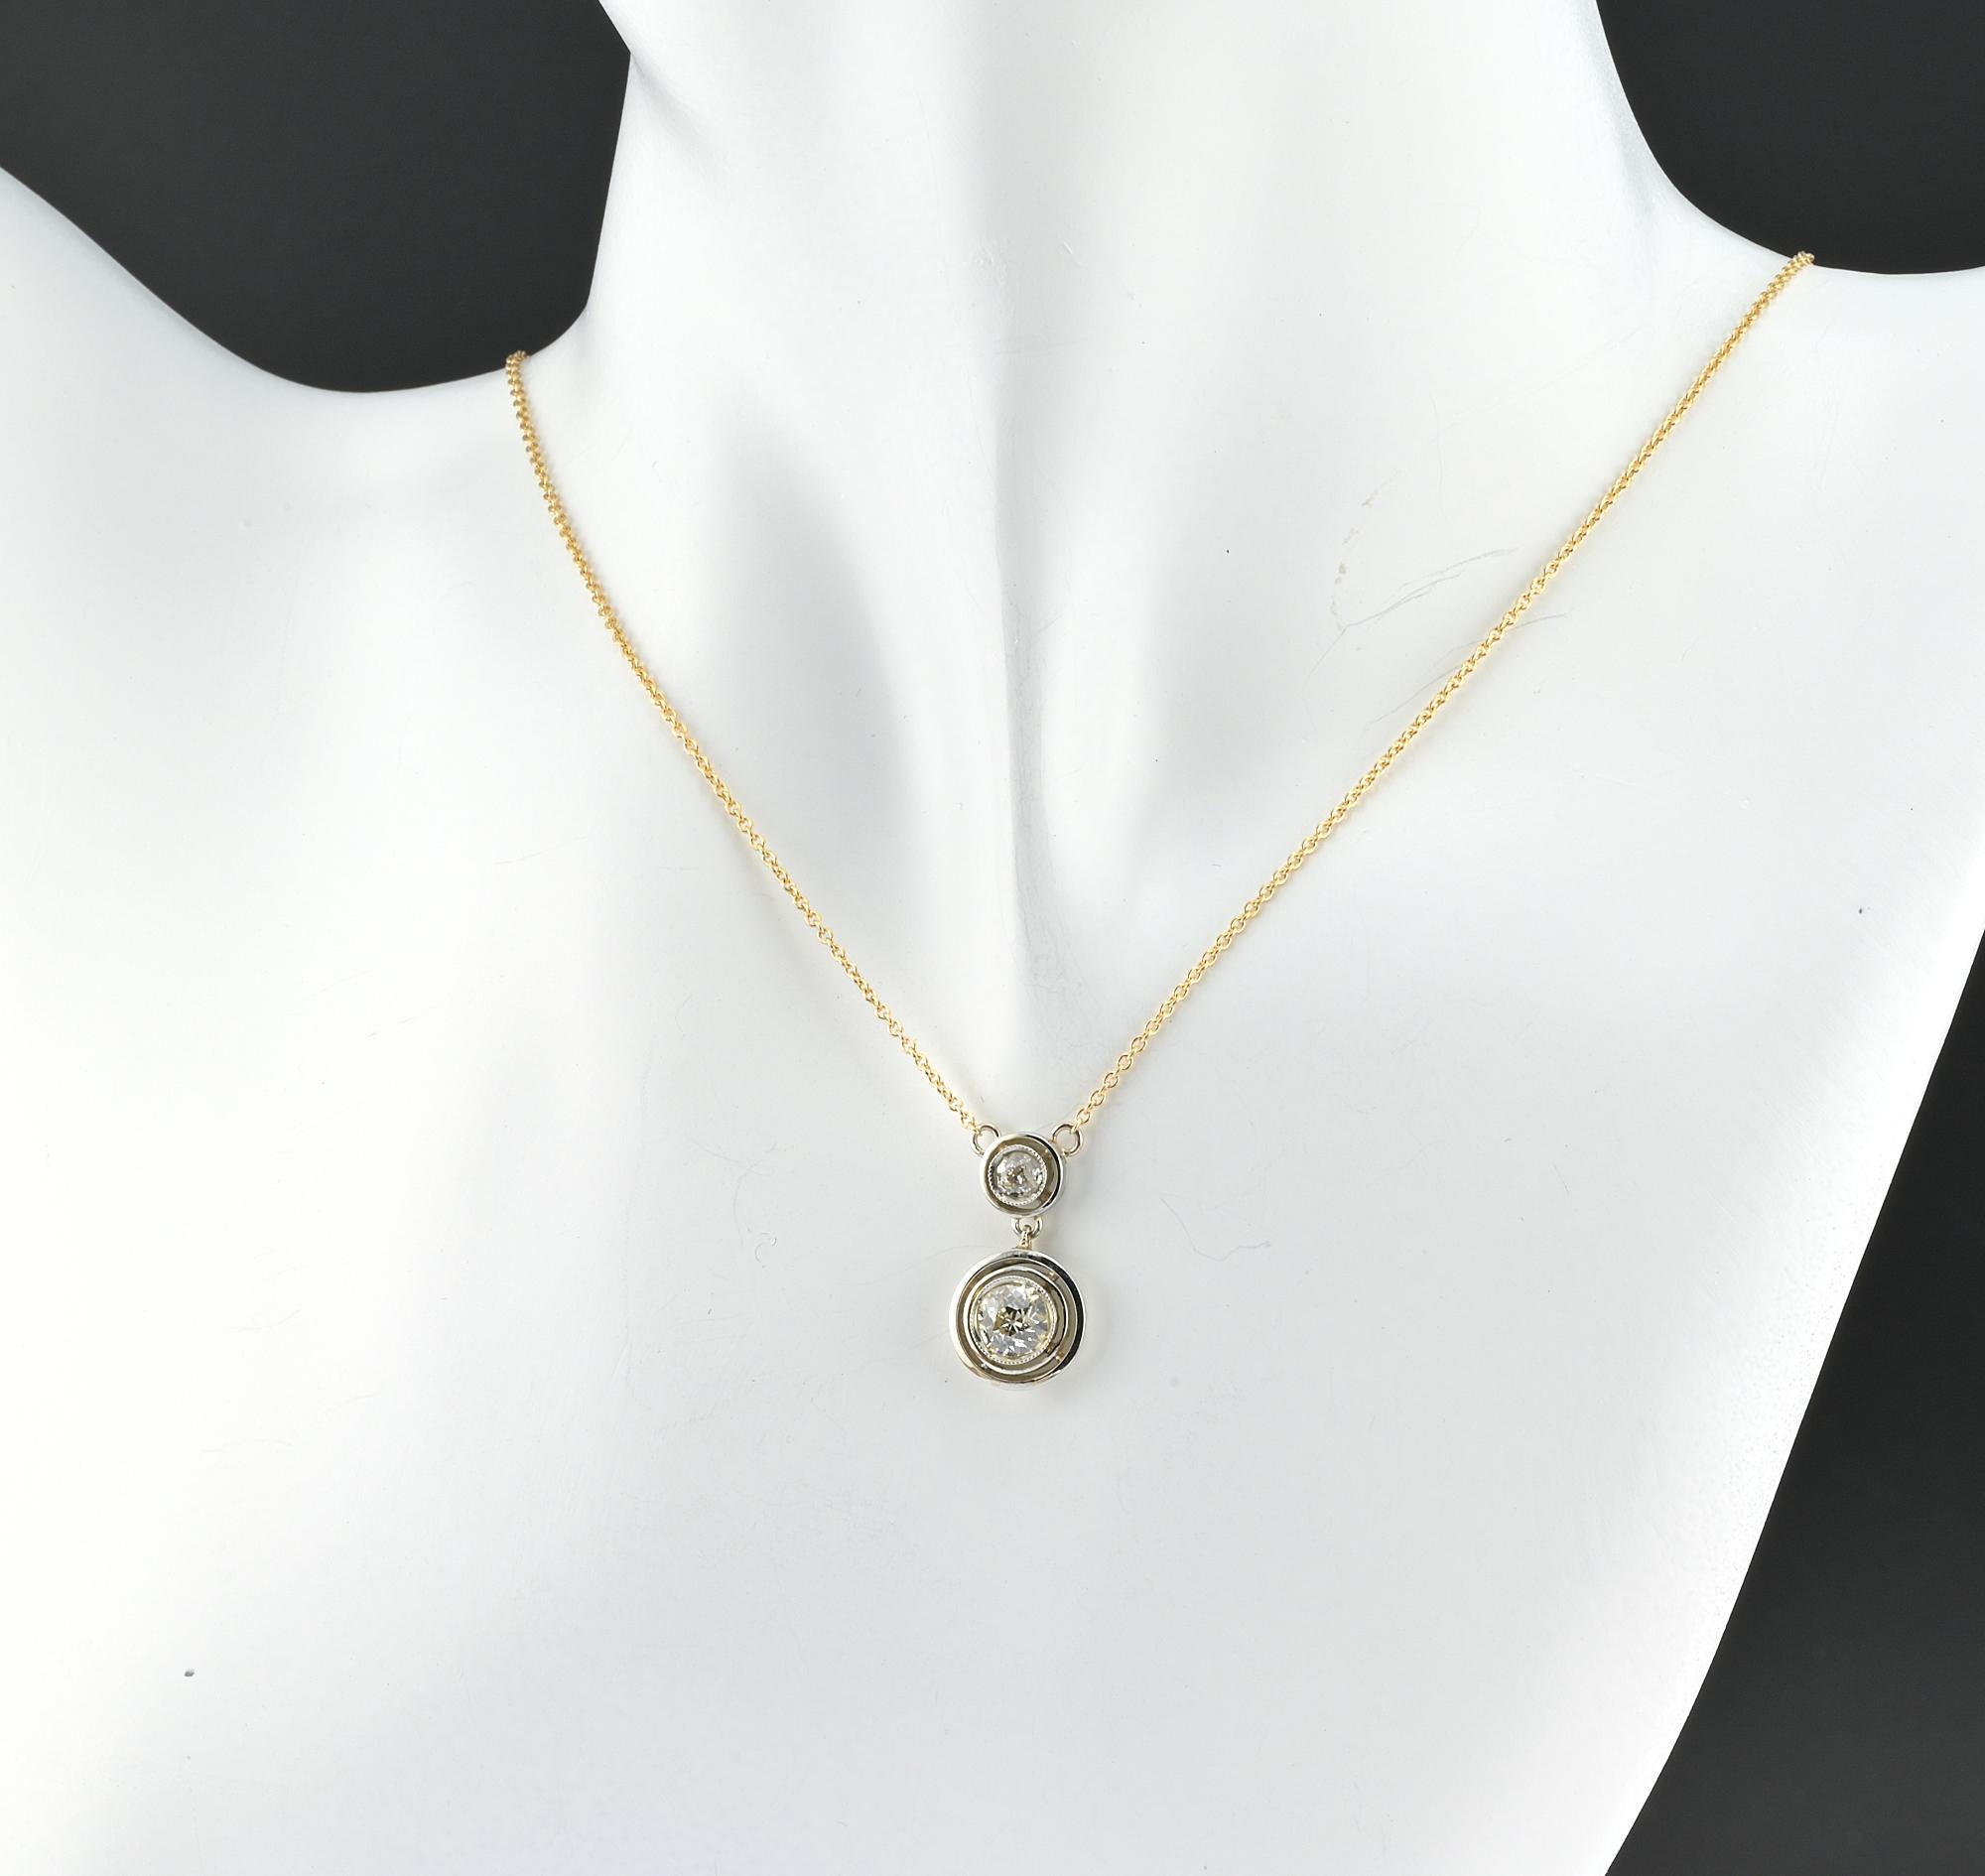 This beautiful twin target necklace is Art Deco period 1925 ca
Consisting in a double Diamond 18 KT white gold target pendant hand crafted one up to the other, smaller on top of the bigger, for a charming effect, completed with a latter classy 18 Kt